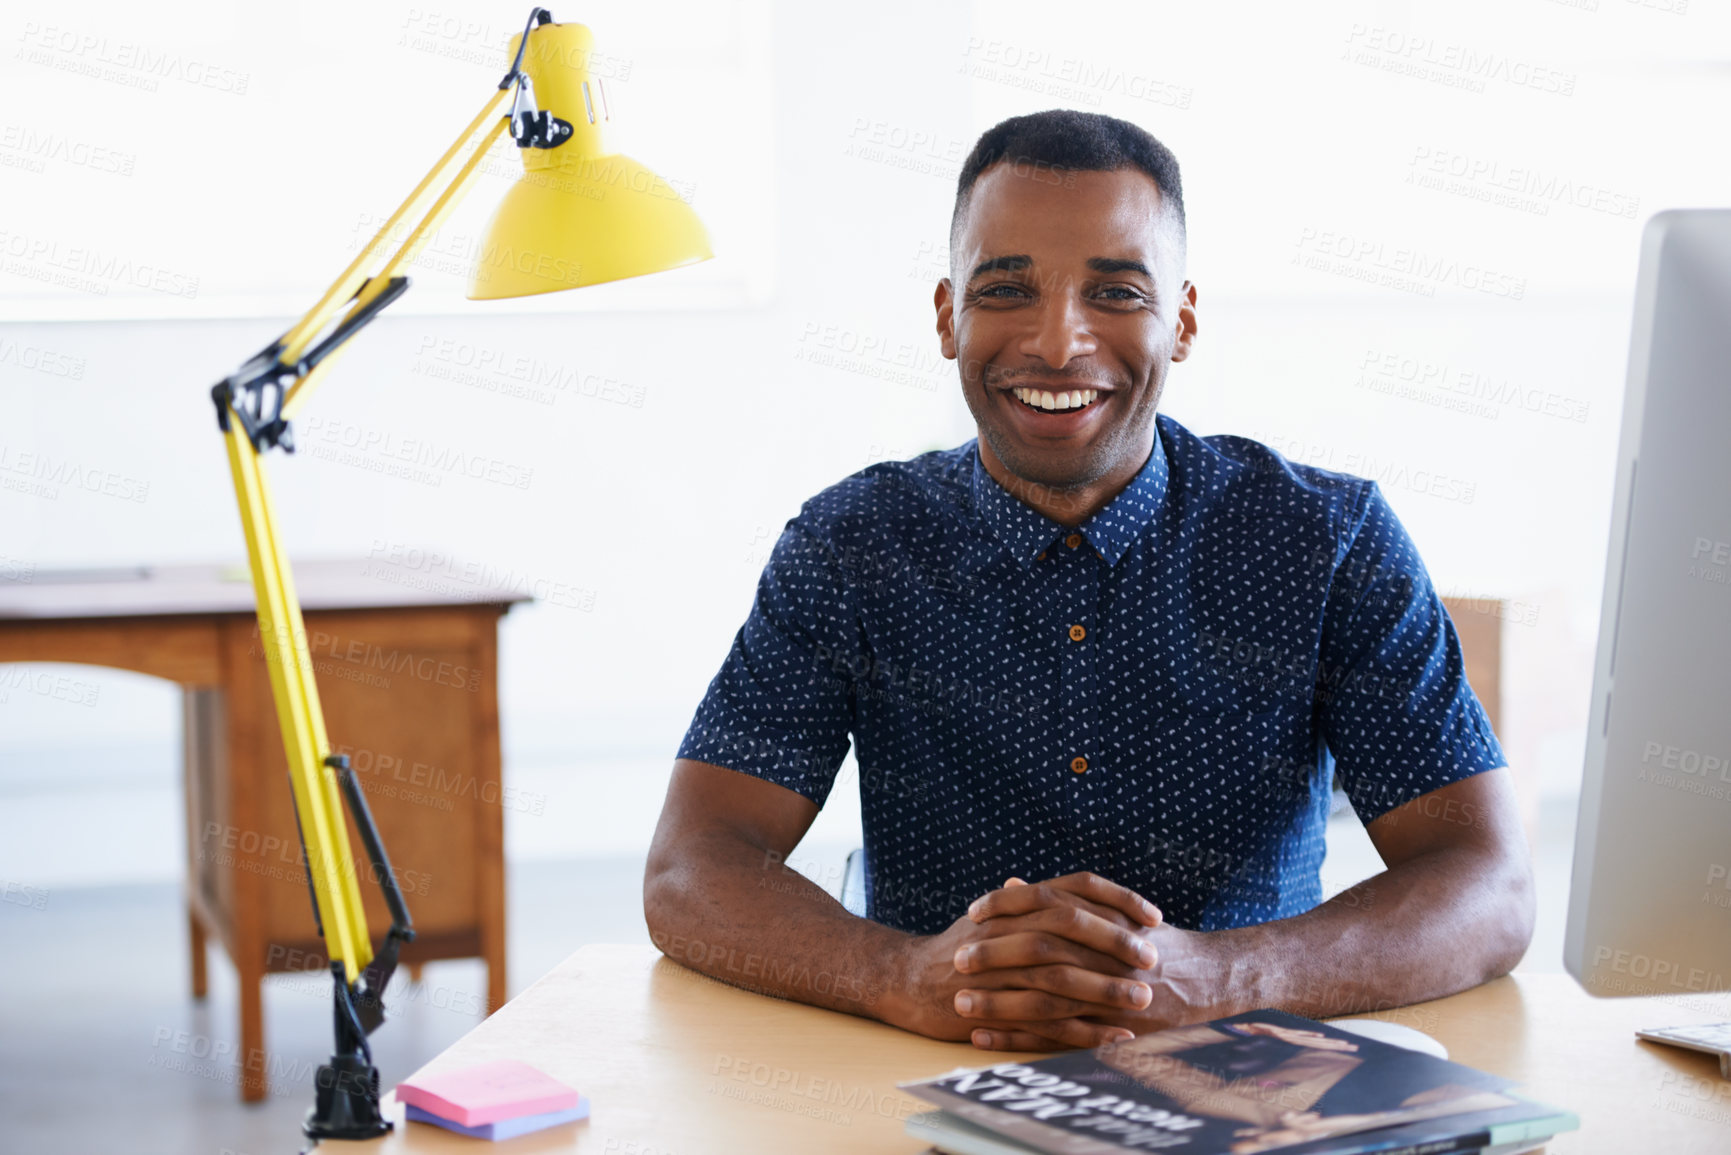 Buy stock photo Young businessman, portrait and happy in office by desk, consultant and creative in career. Smile, black man or positive face of journalist in co working space or professional for ambition in company